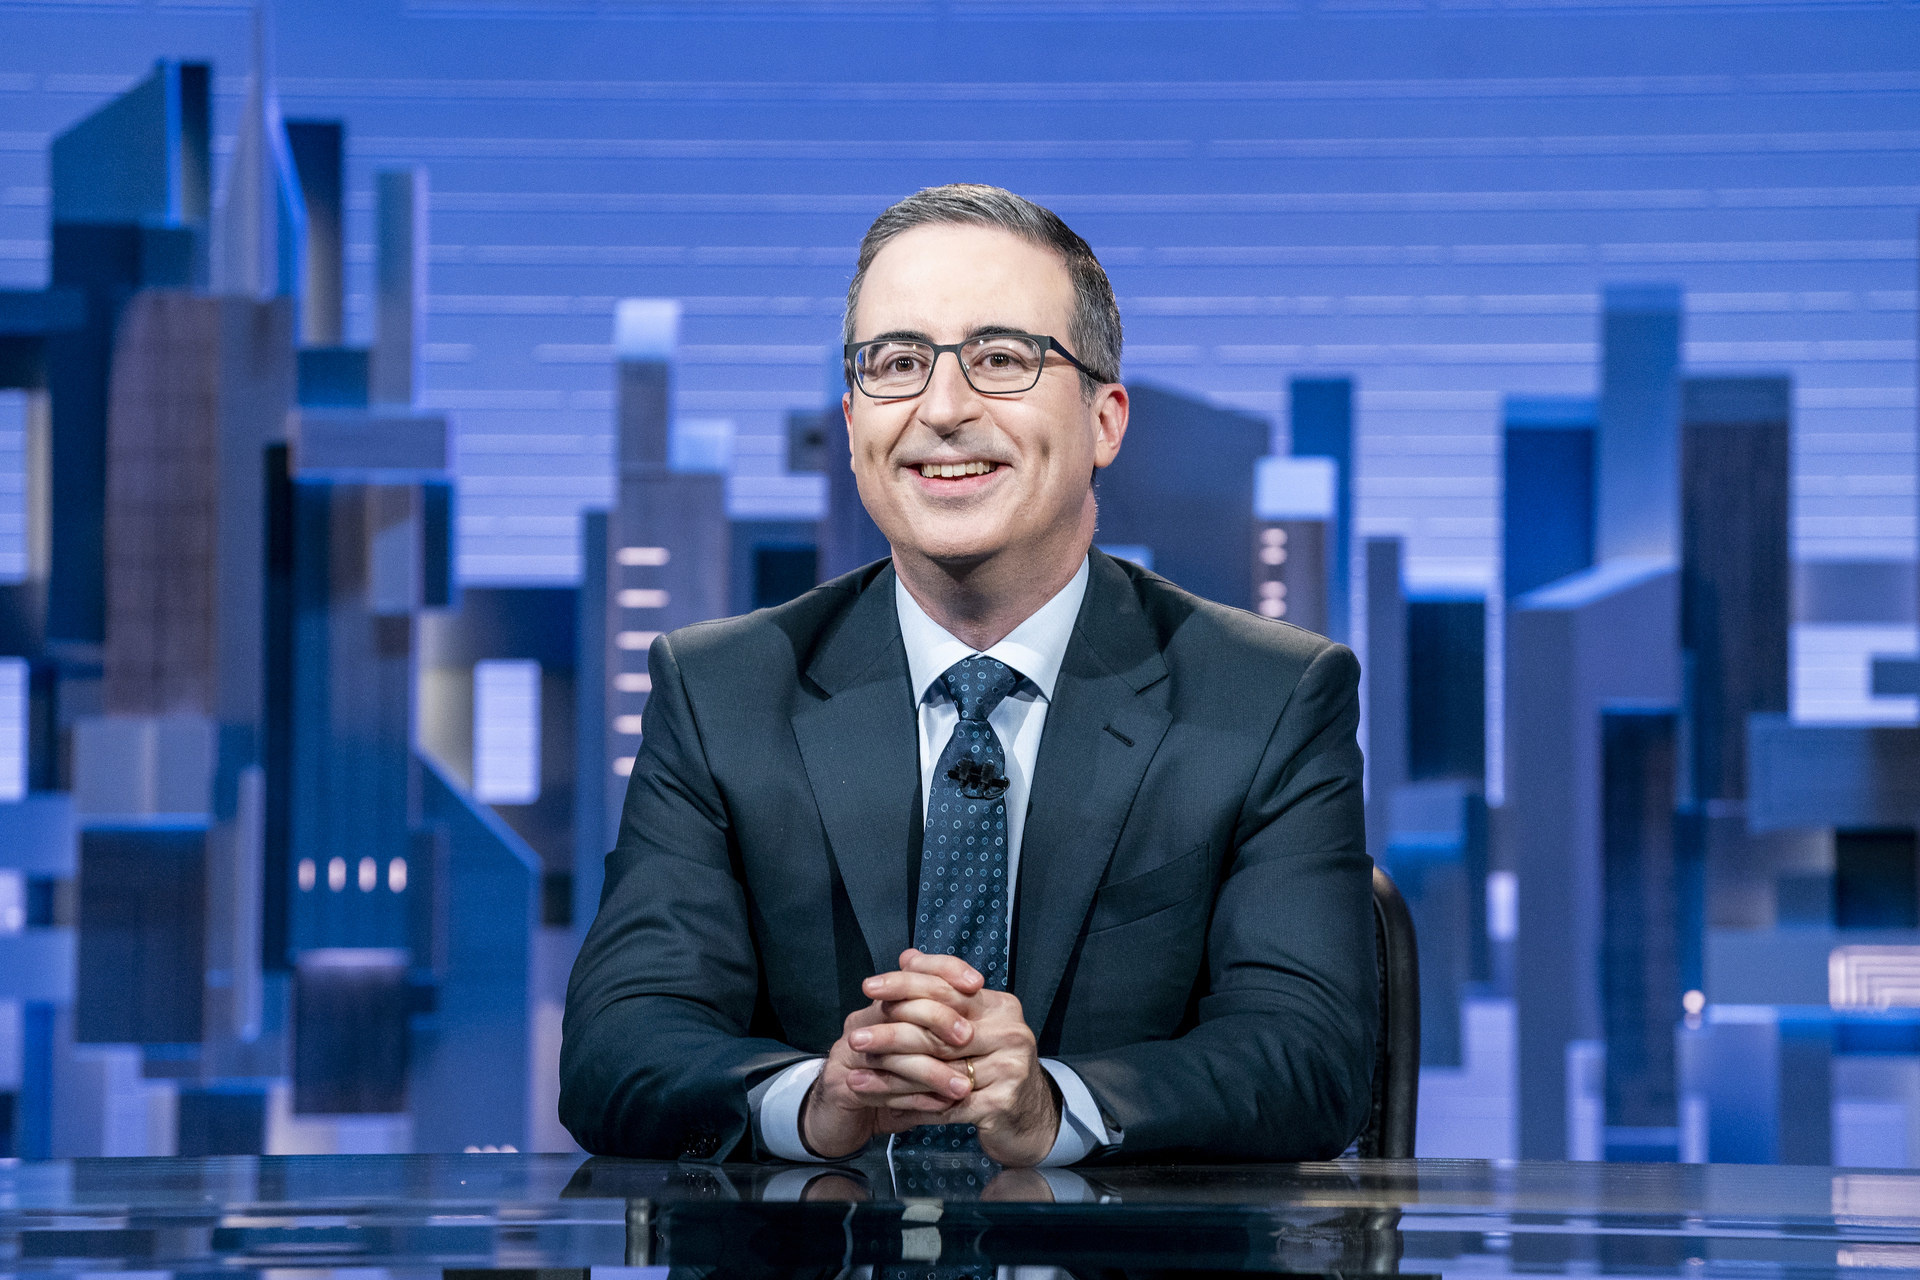 Last Week Tonight with John Oliver TV Shows, Best HBO Max shows, July 2022, 1920x1280 HD Desktop